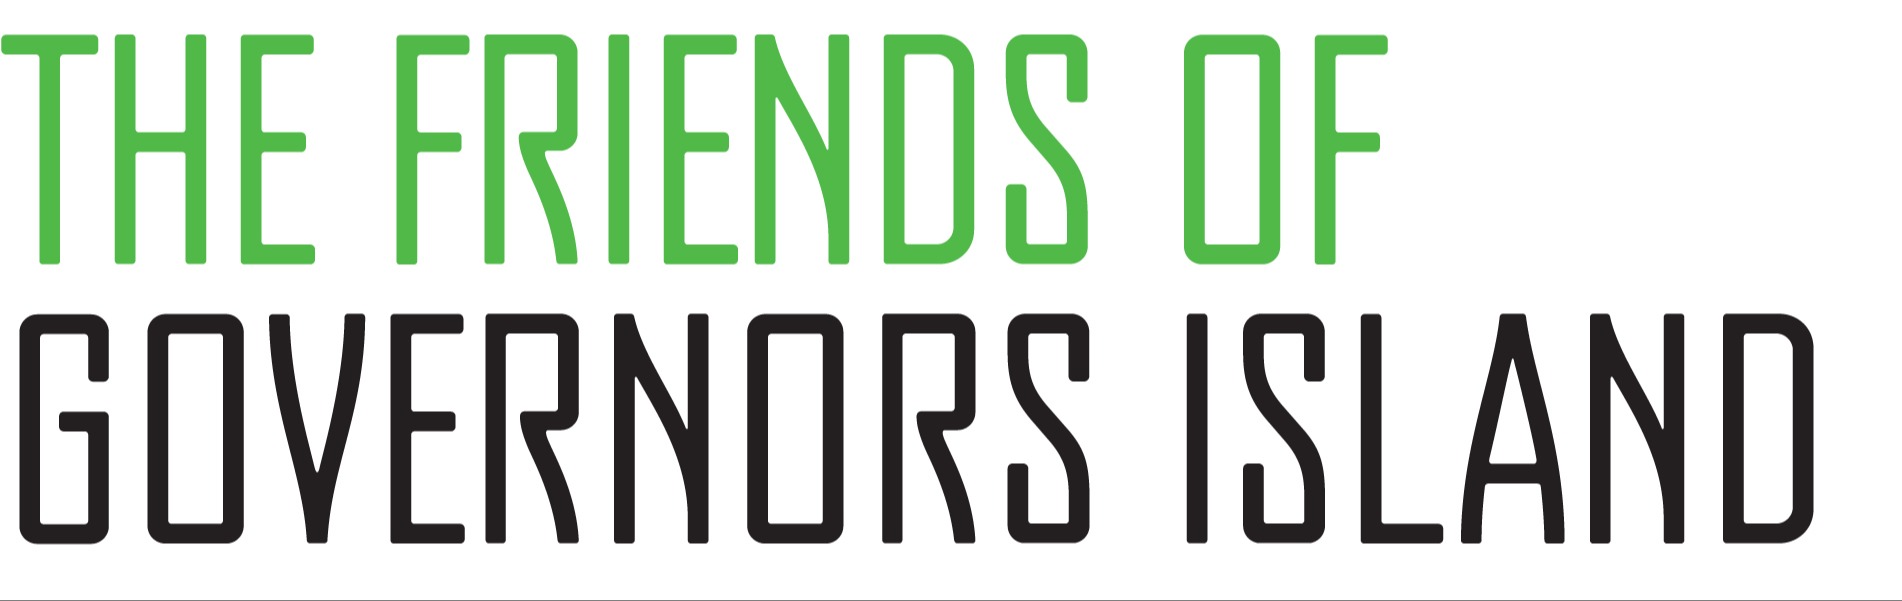 The Friends of Governors Island logo